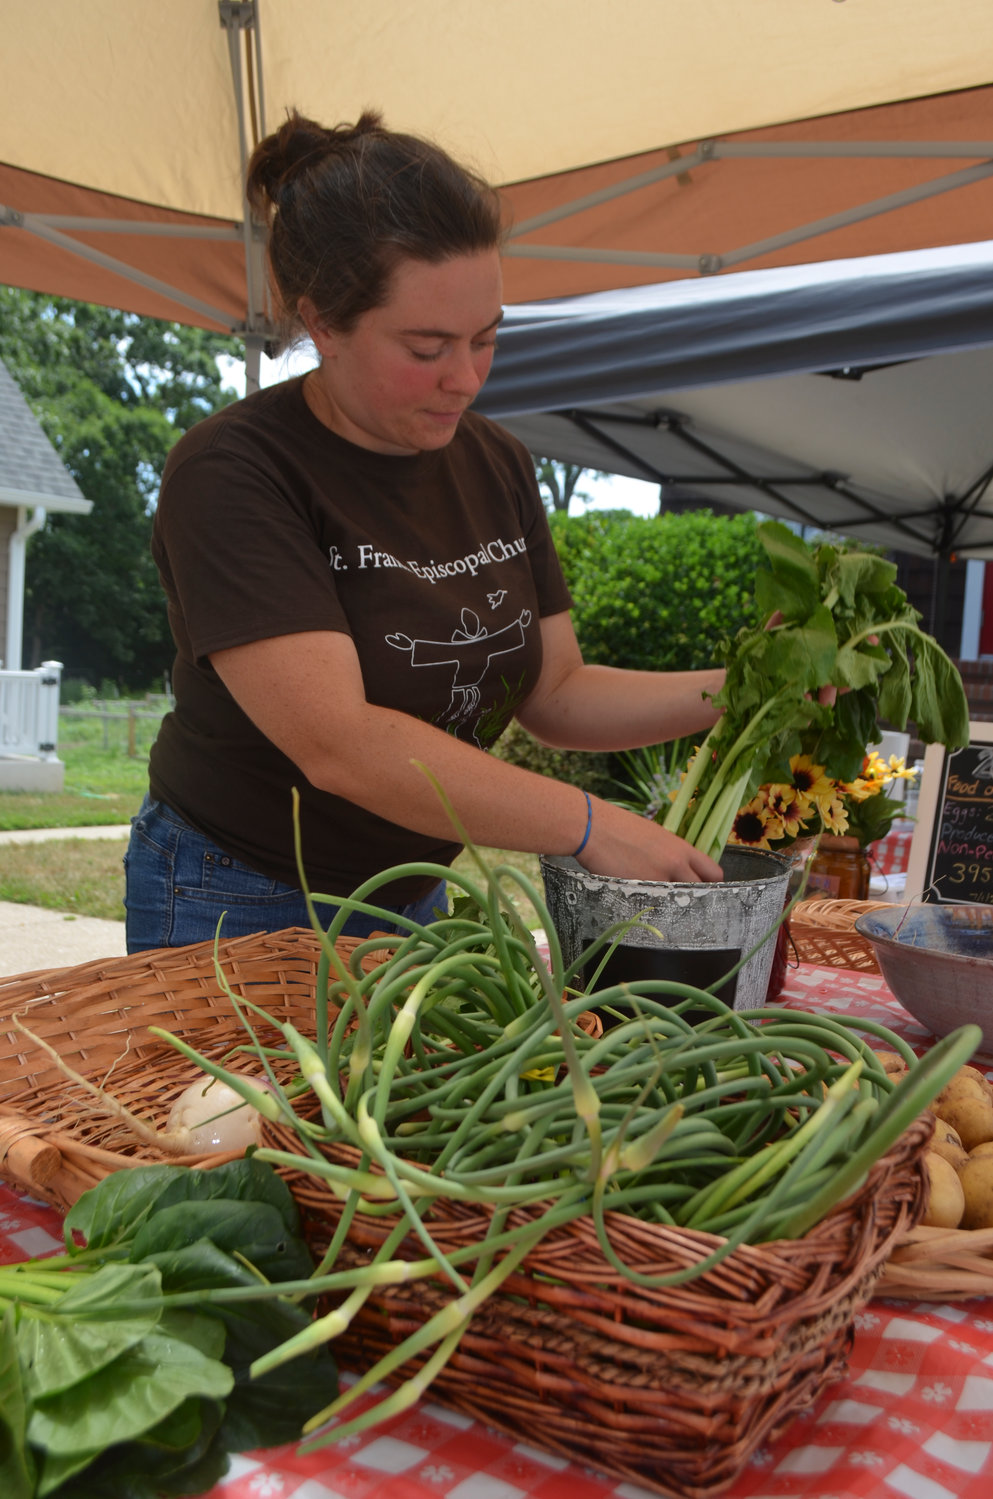 Kristin Talbot, the garden and office manager at St. Francis Episcopal Church in North Bellmore, tended to some crops at a farm stand this summer.